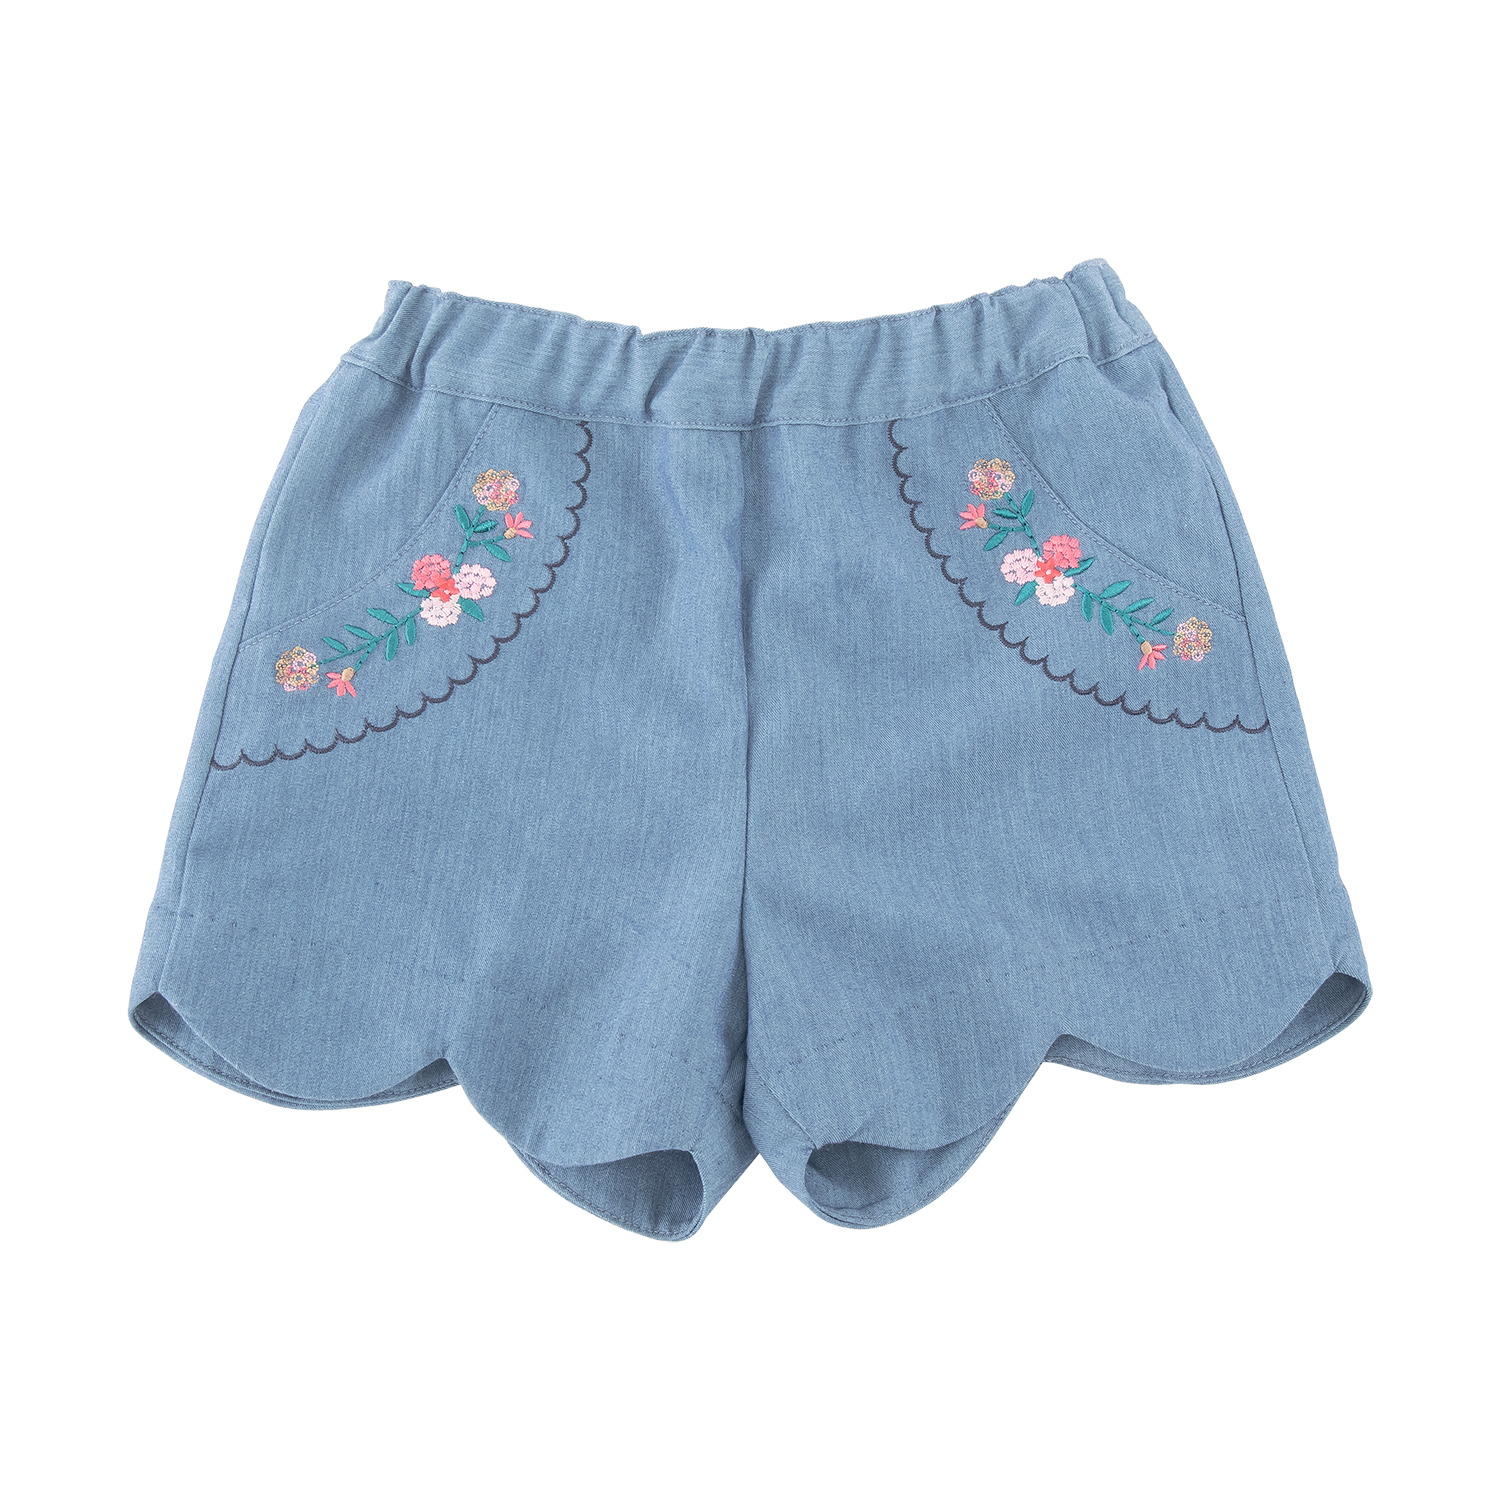 <tc>Blue baby shorts with embroidered flowers</tc>